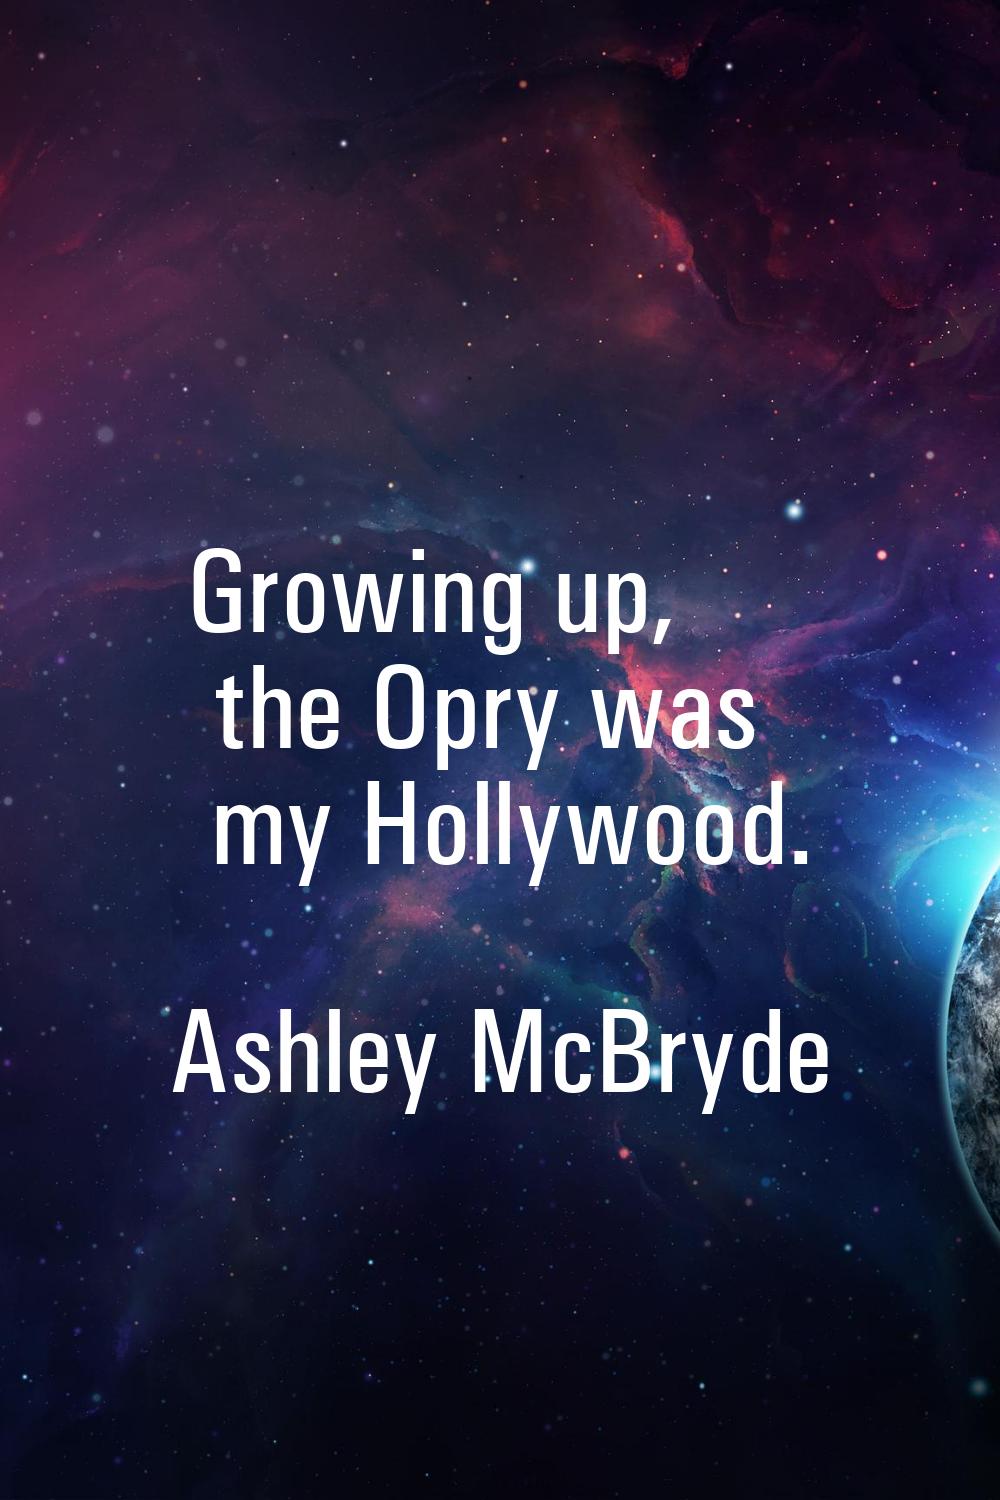 Growing up, the Opry was my Hollywood.